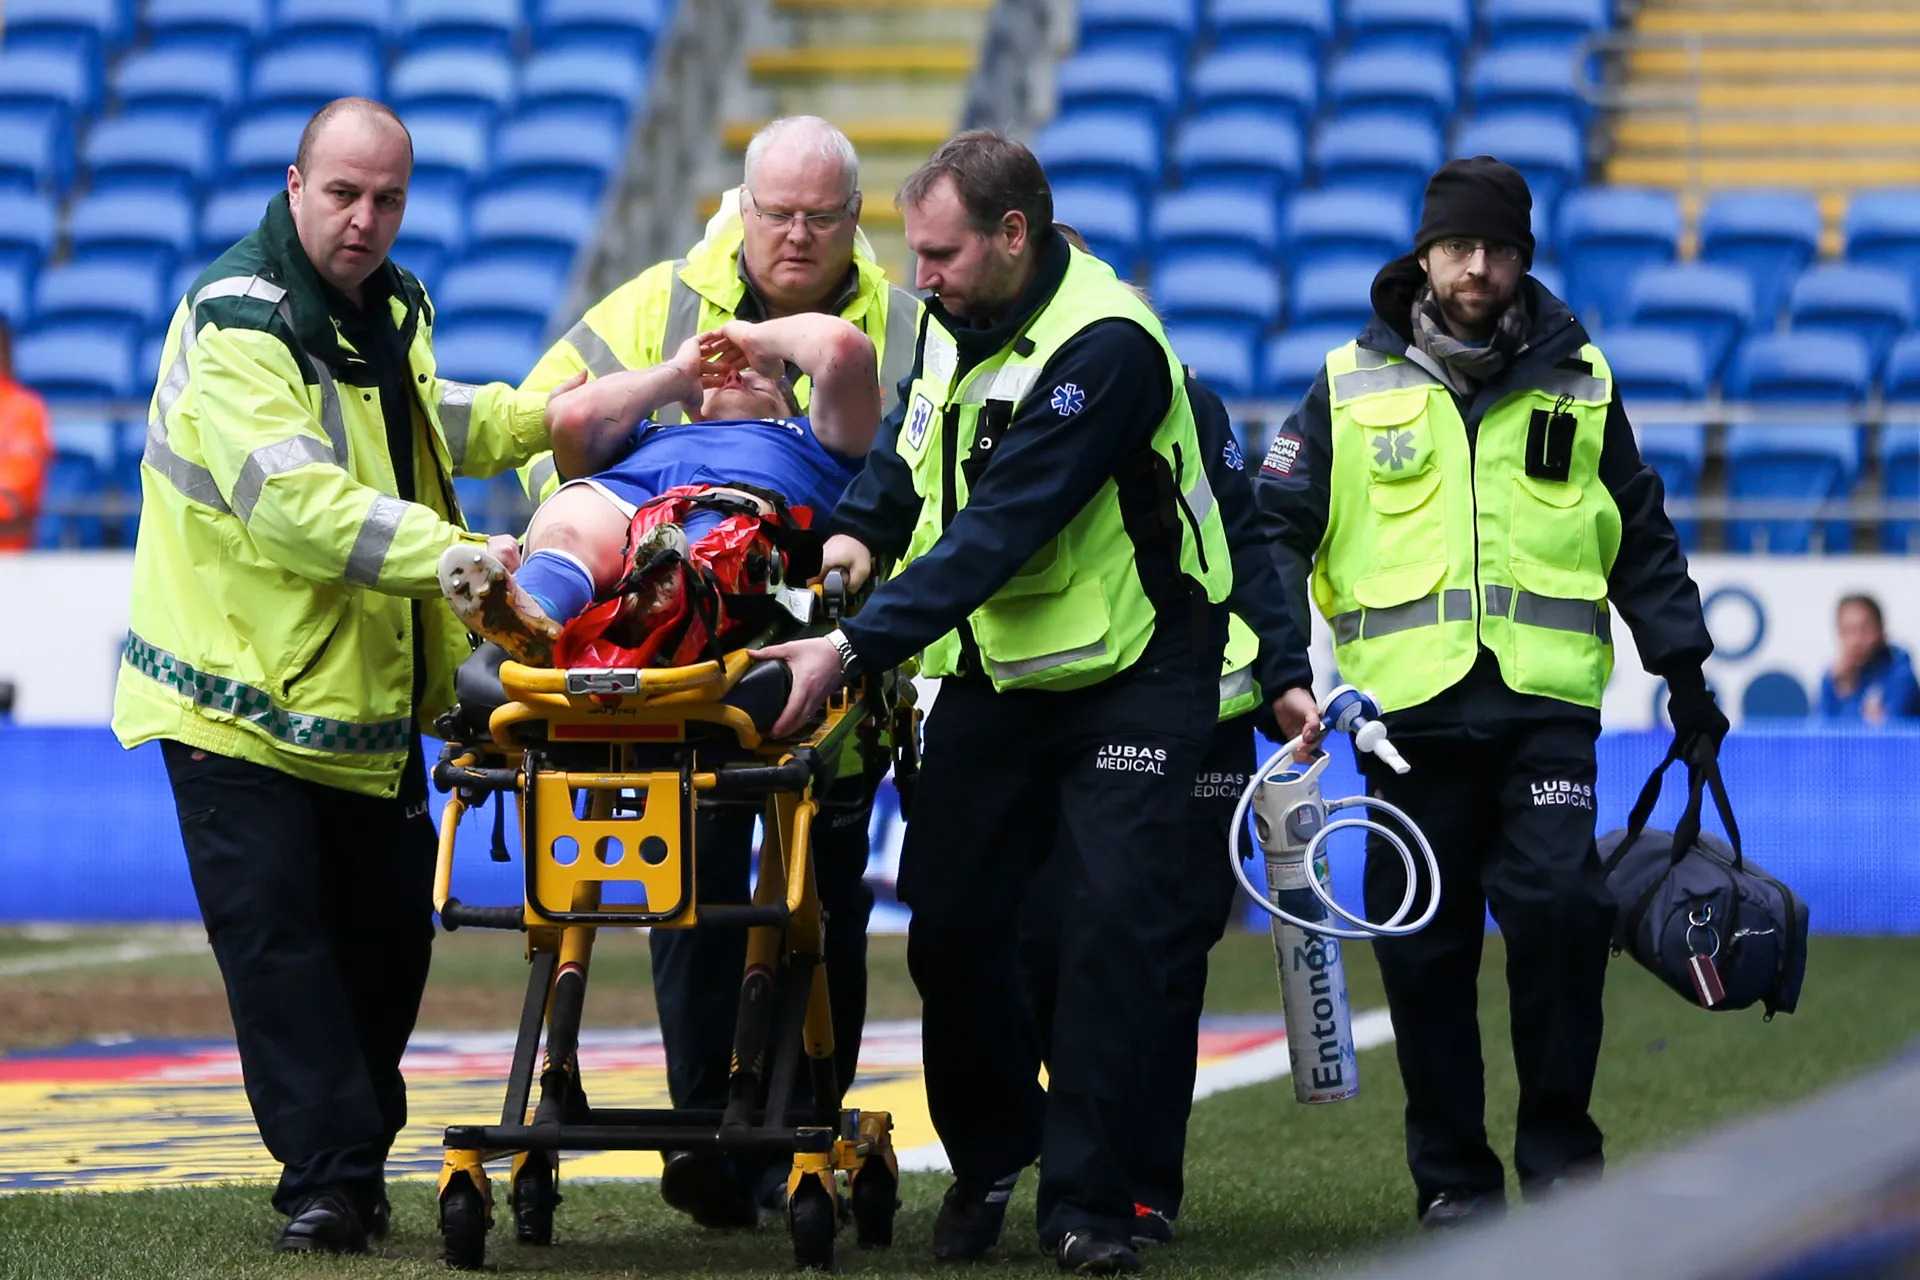 Pitch side medical team assisting an injured player at Cardiff city football club. 